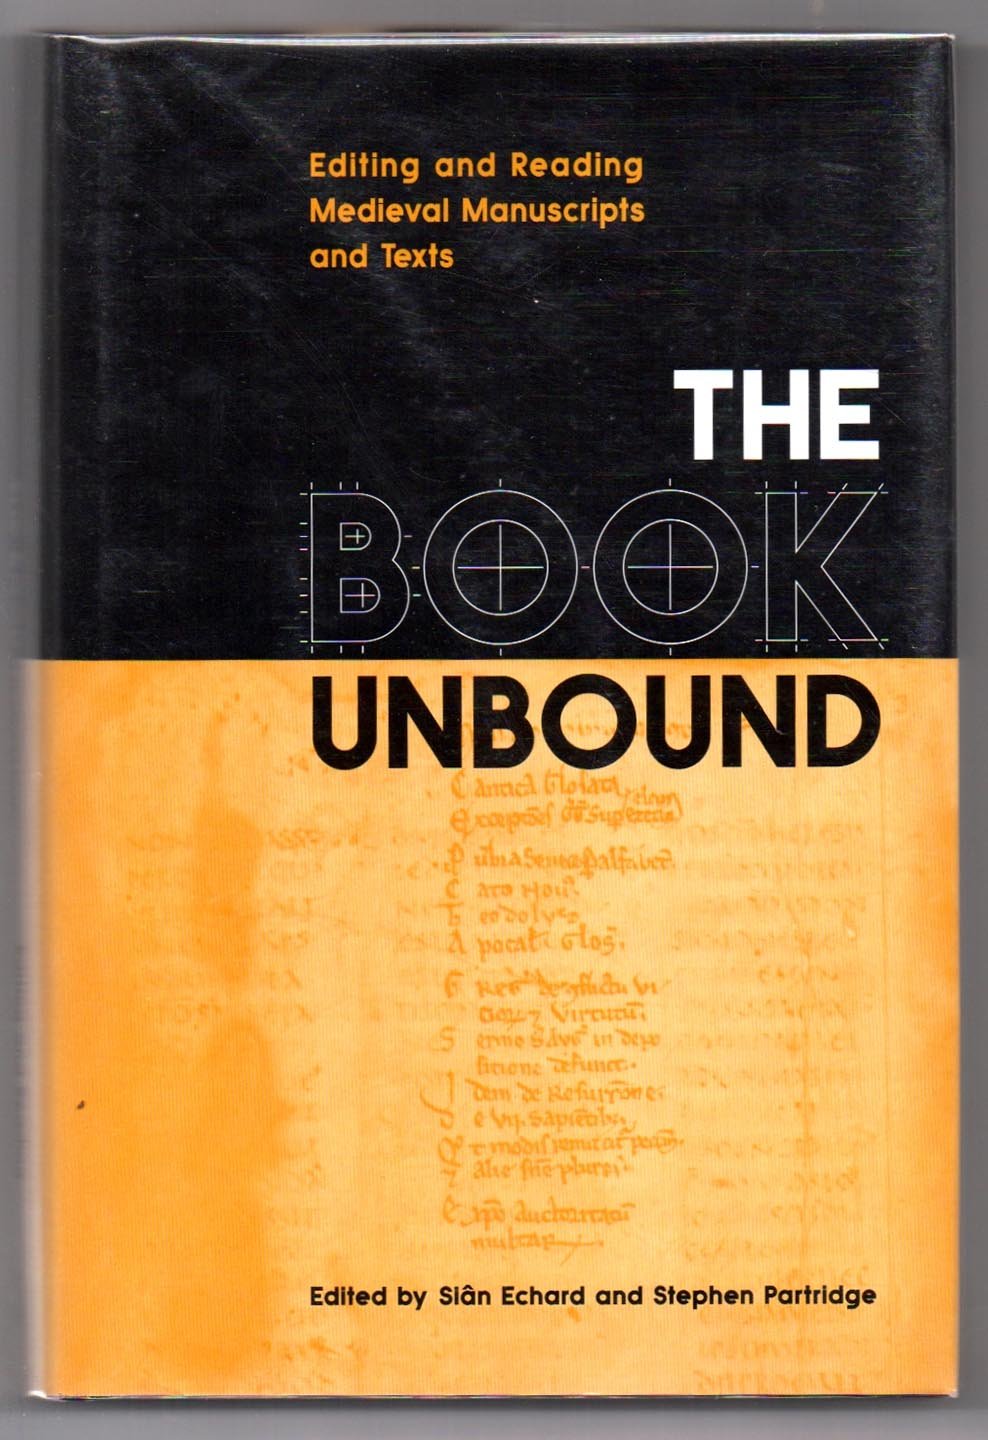 The Book Unbound: Editing and Reading Medieval Manuscripts and Texts